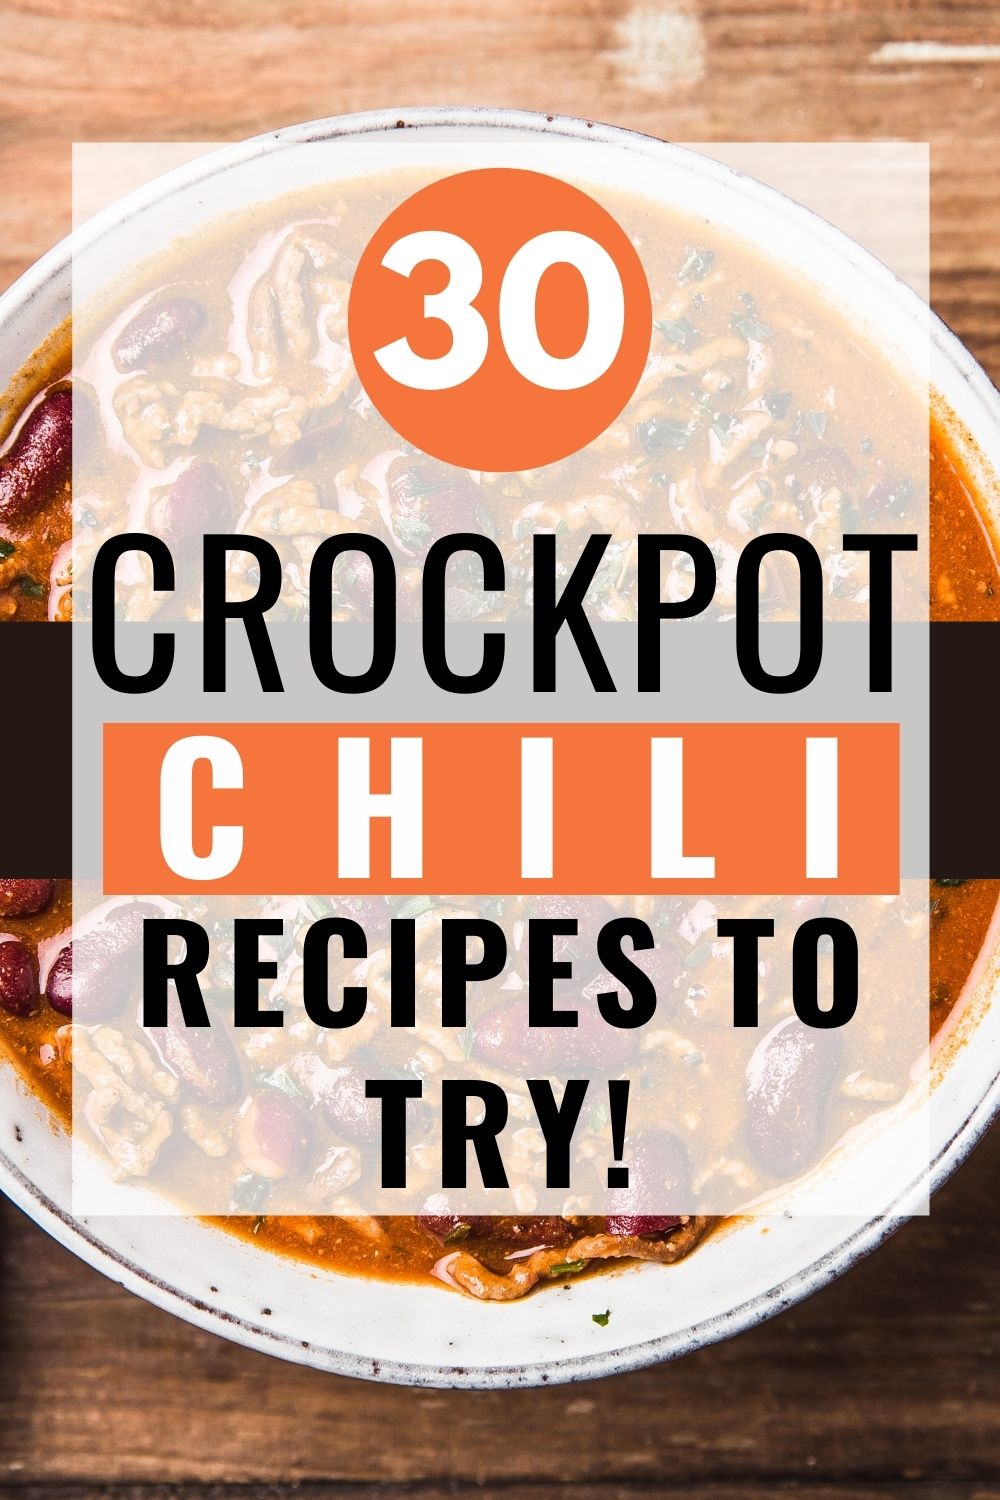 Pin showing the title of 30 crockpot chili recipes to try with chili photo in the background.